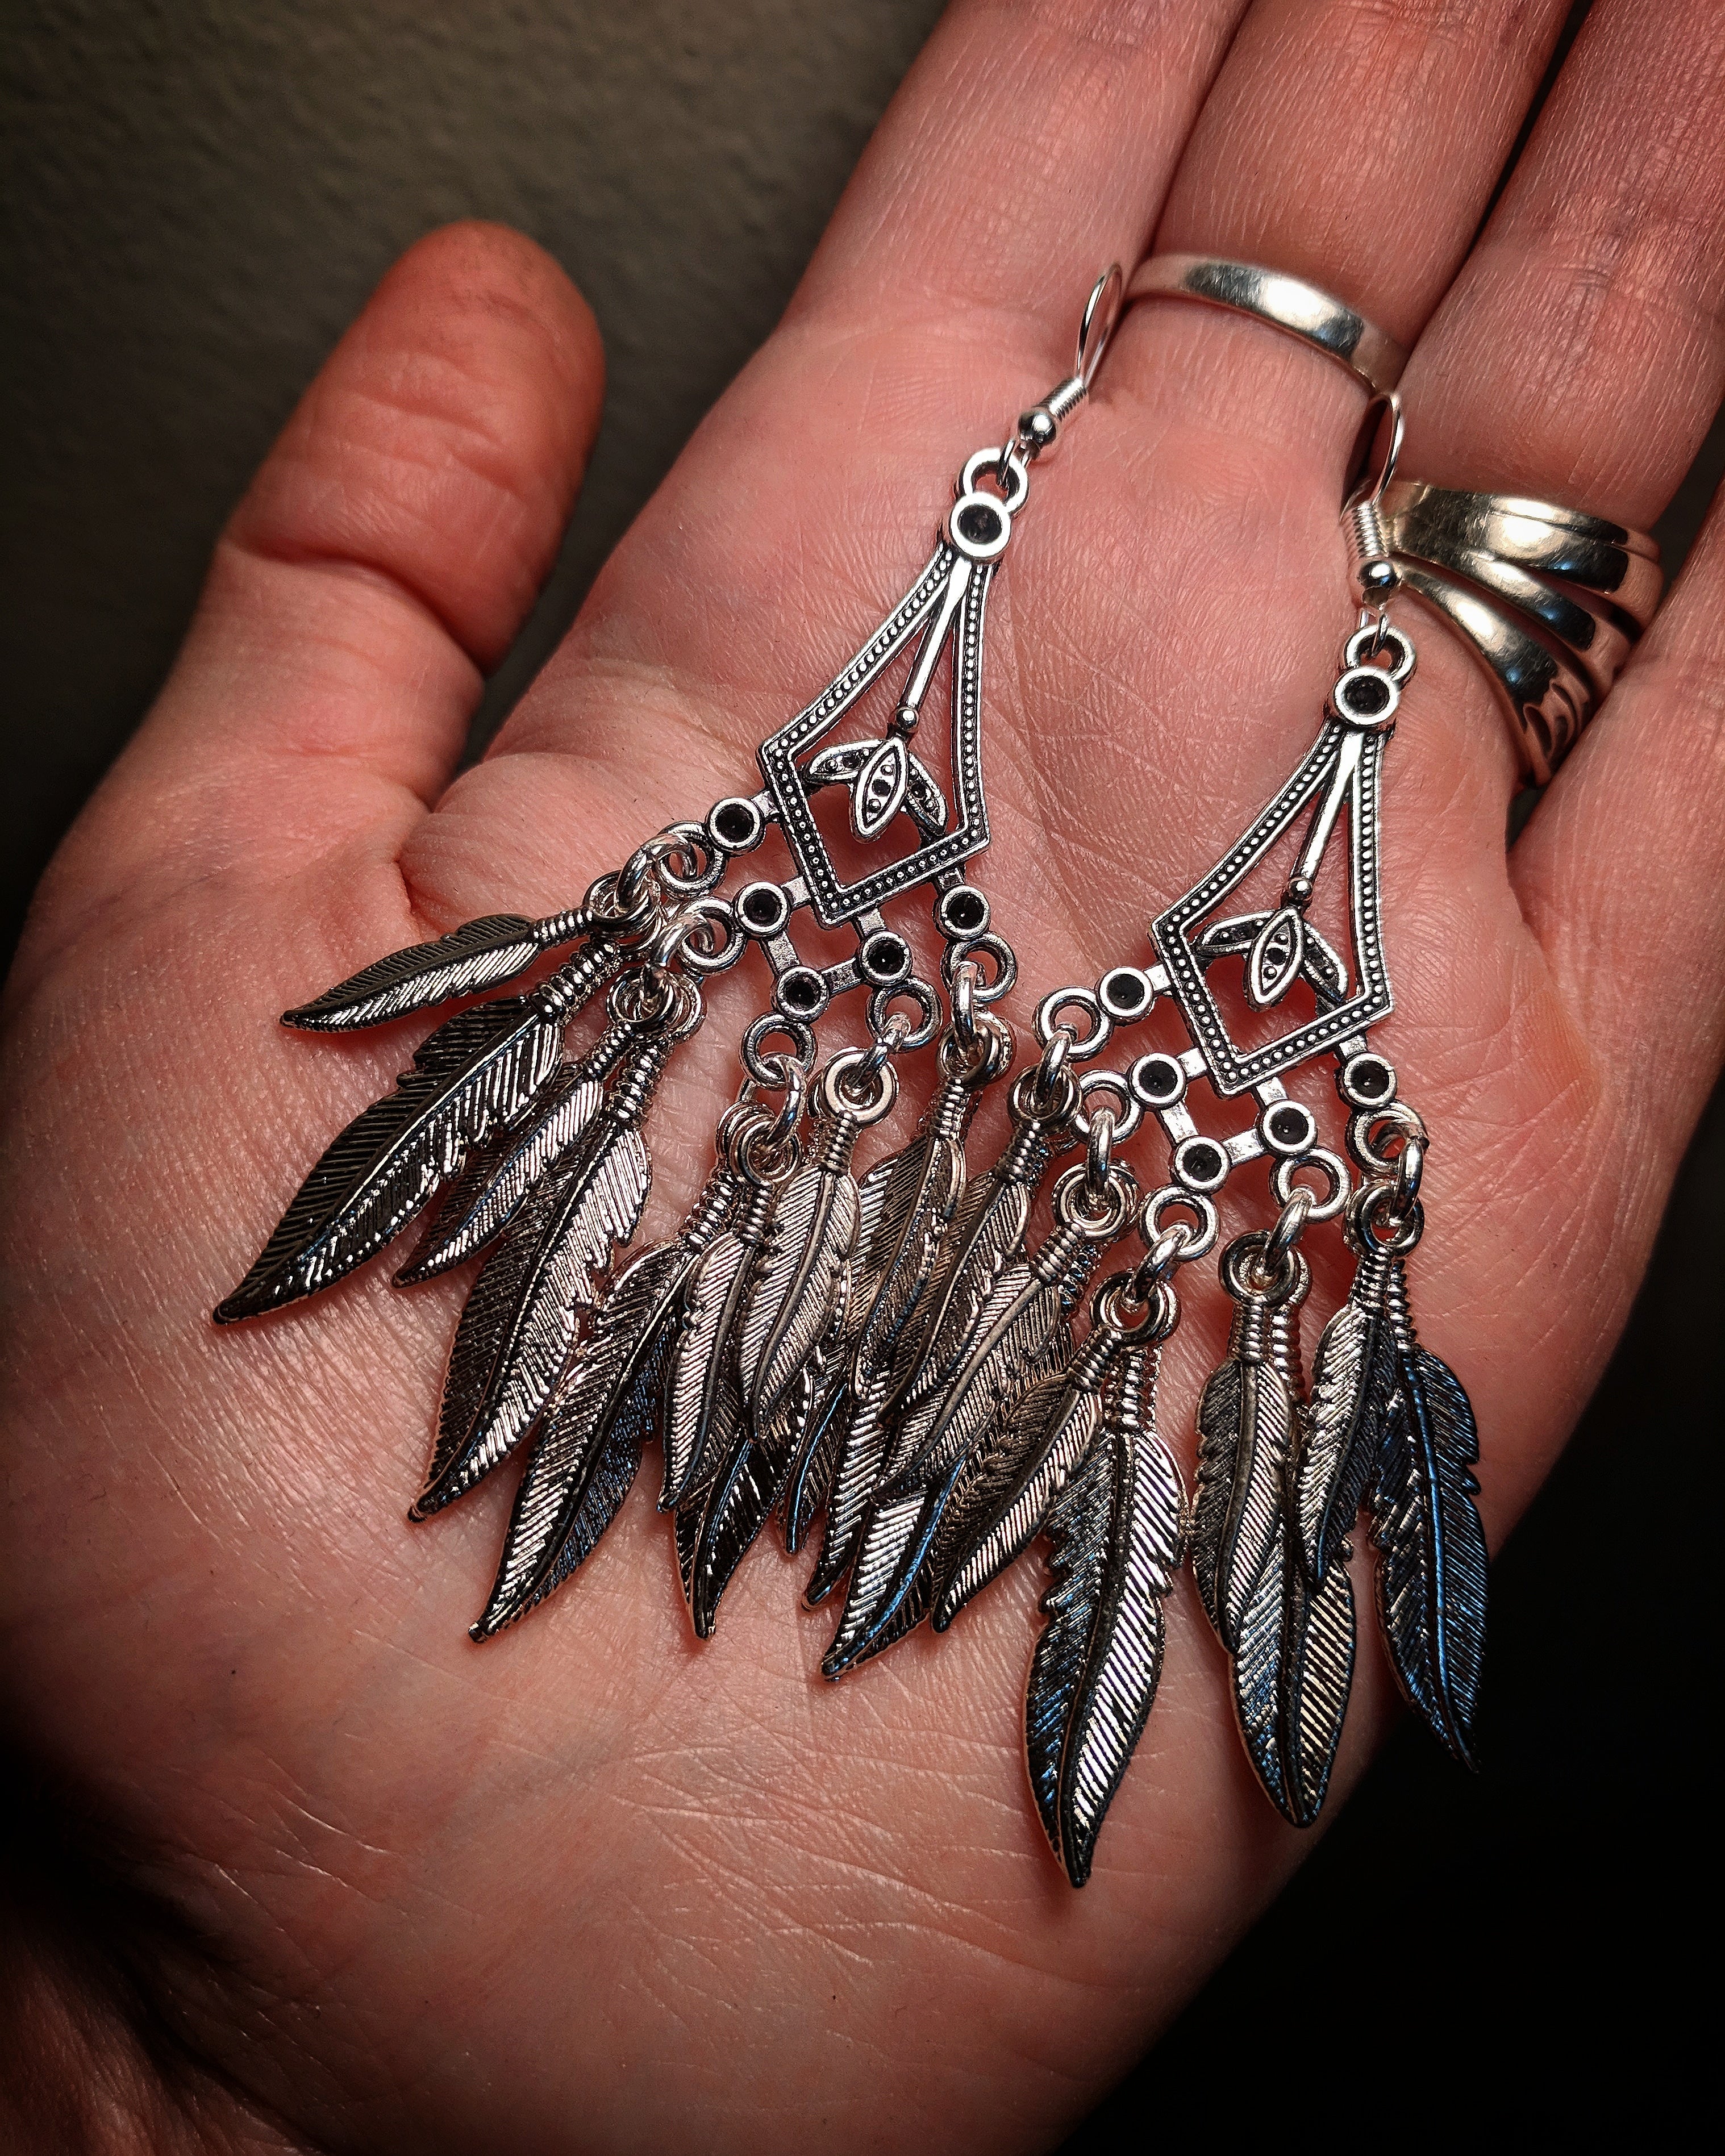 Decorative Cathedral Triangle Metal Chandelier Dreamcatcher Feather Silver Colored Earrings With Surgical Stainless Steel Ear Hooks